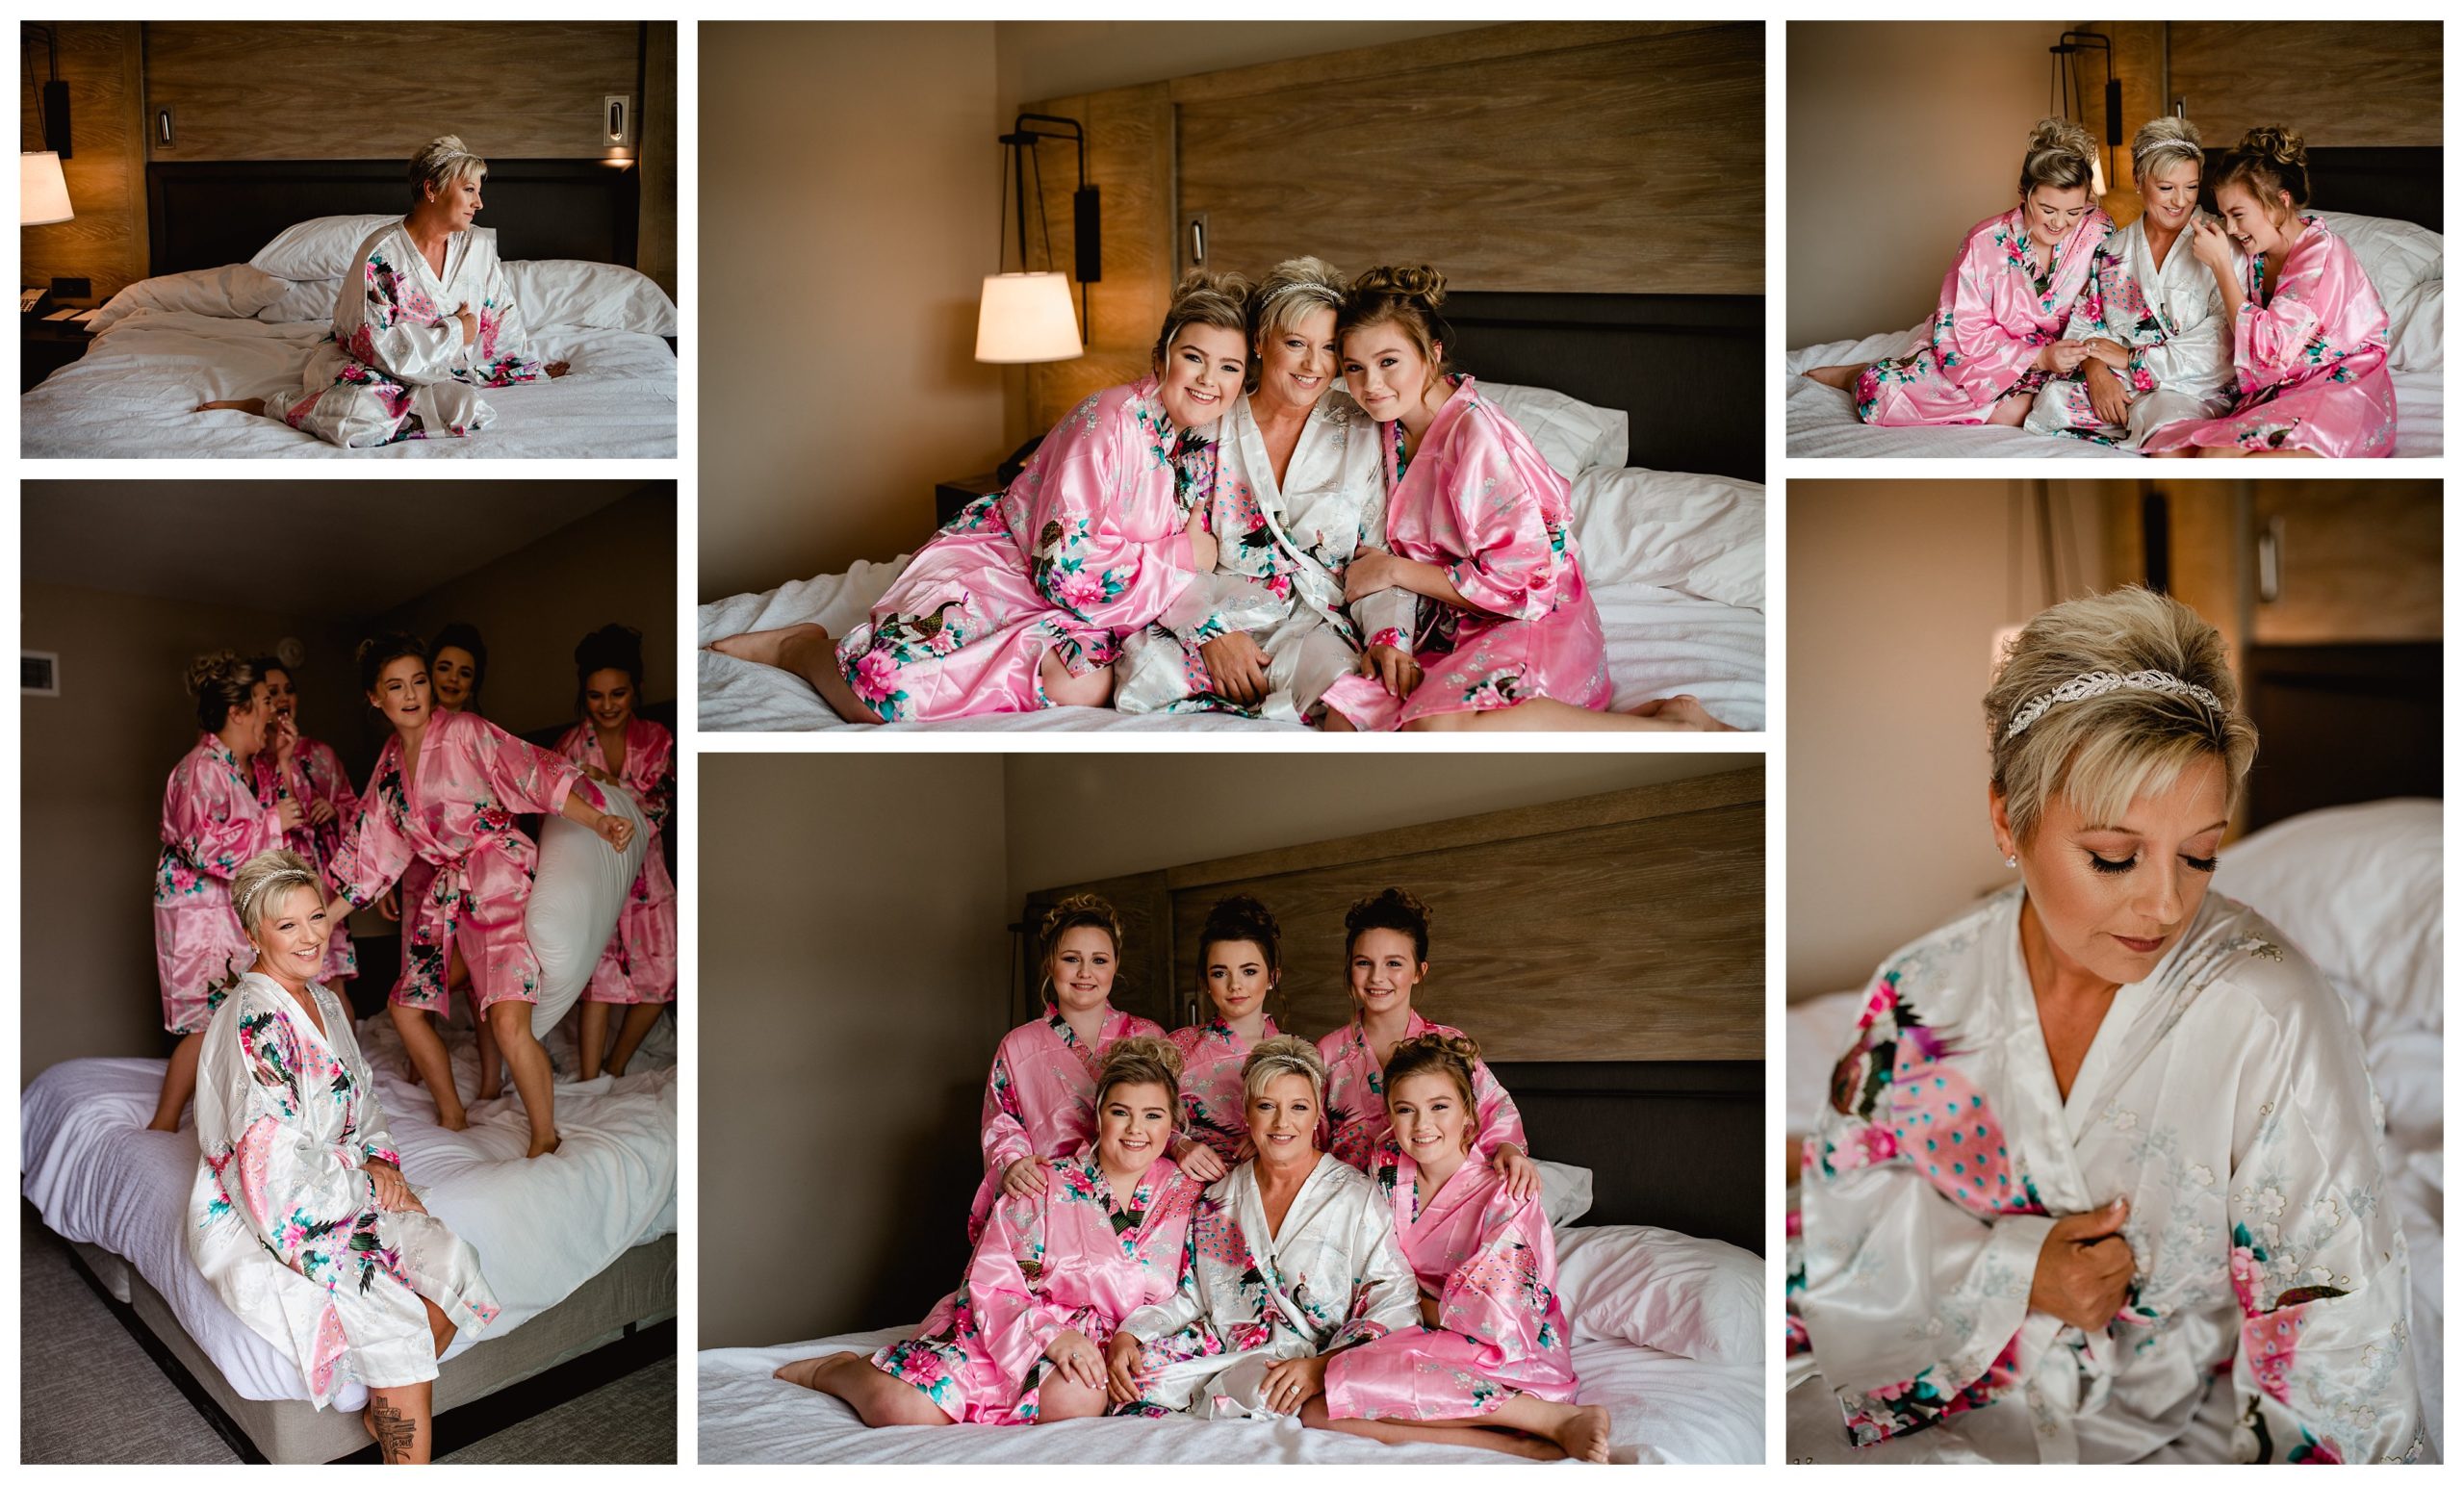 Loving wedding has daughters as the bridesmaids. Getting ready photos in hotel.